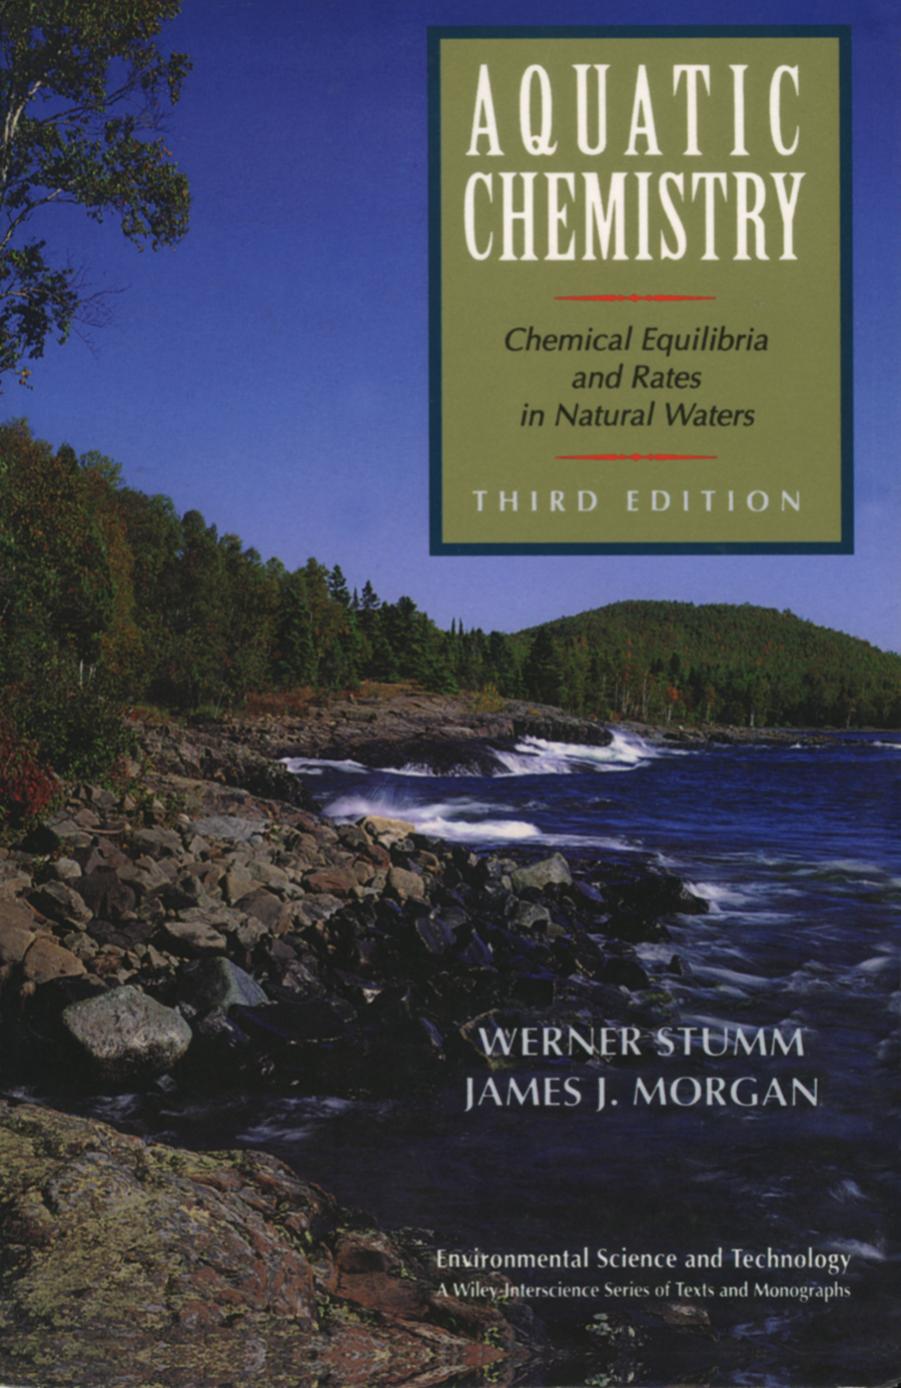 Environmental Science and Technology : A Wiley-Interscience Series of Texts and Monographs : Aquatic Chemistry : Chemical Equilibria and Rates in Natural Waters (3rd Edition)